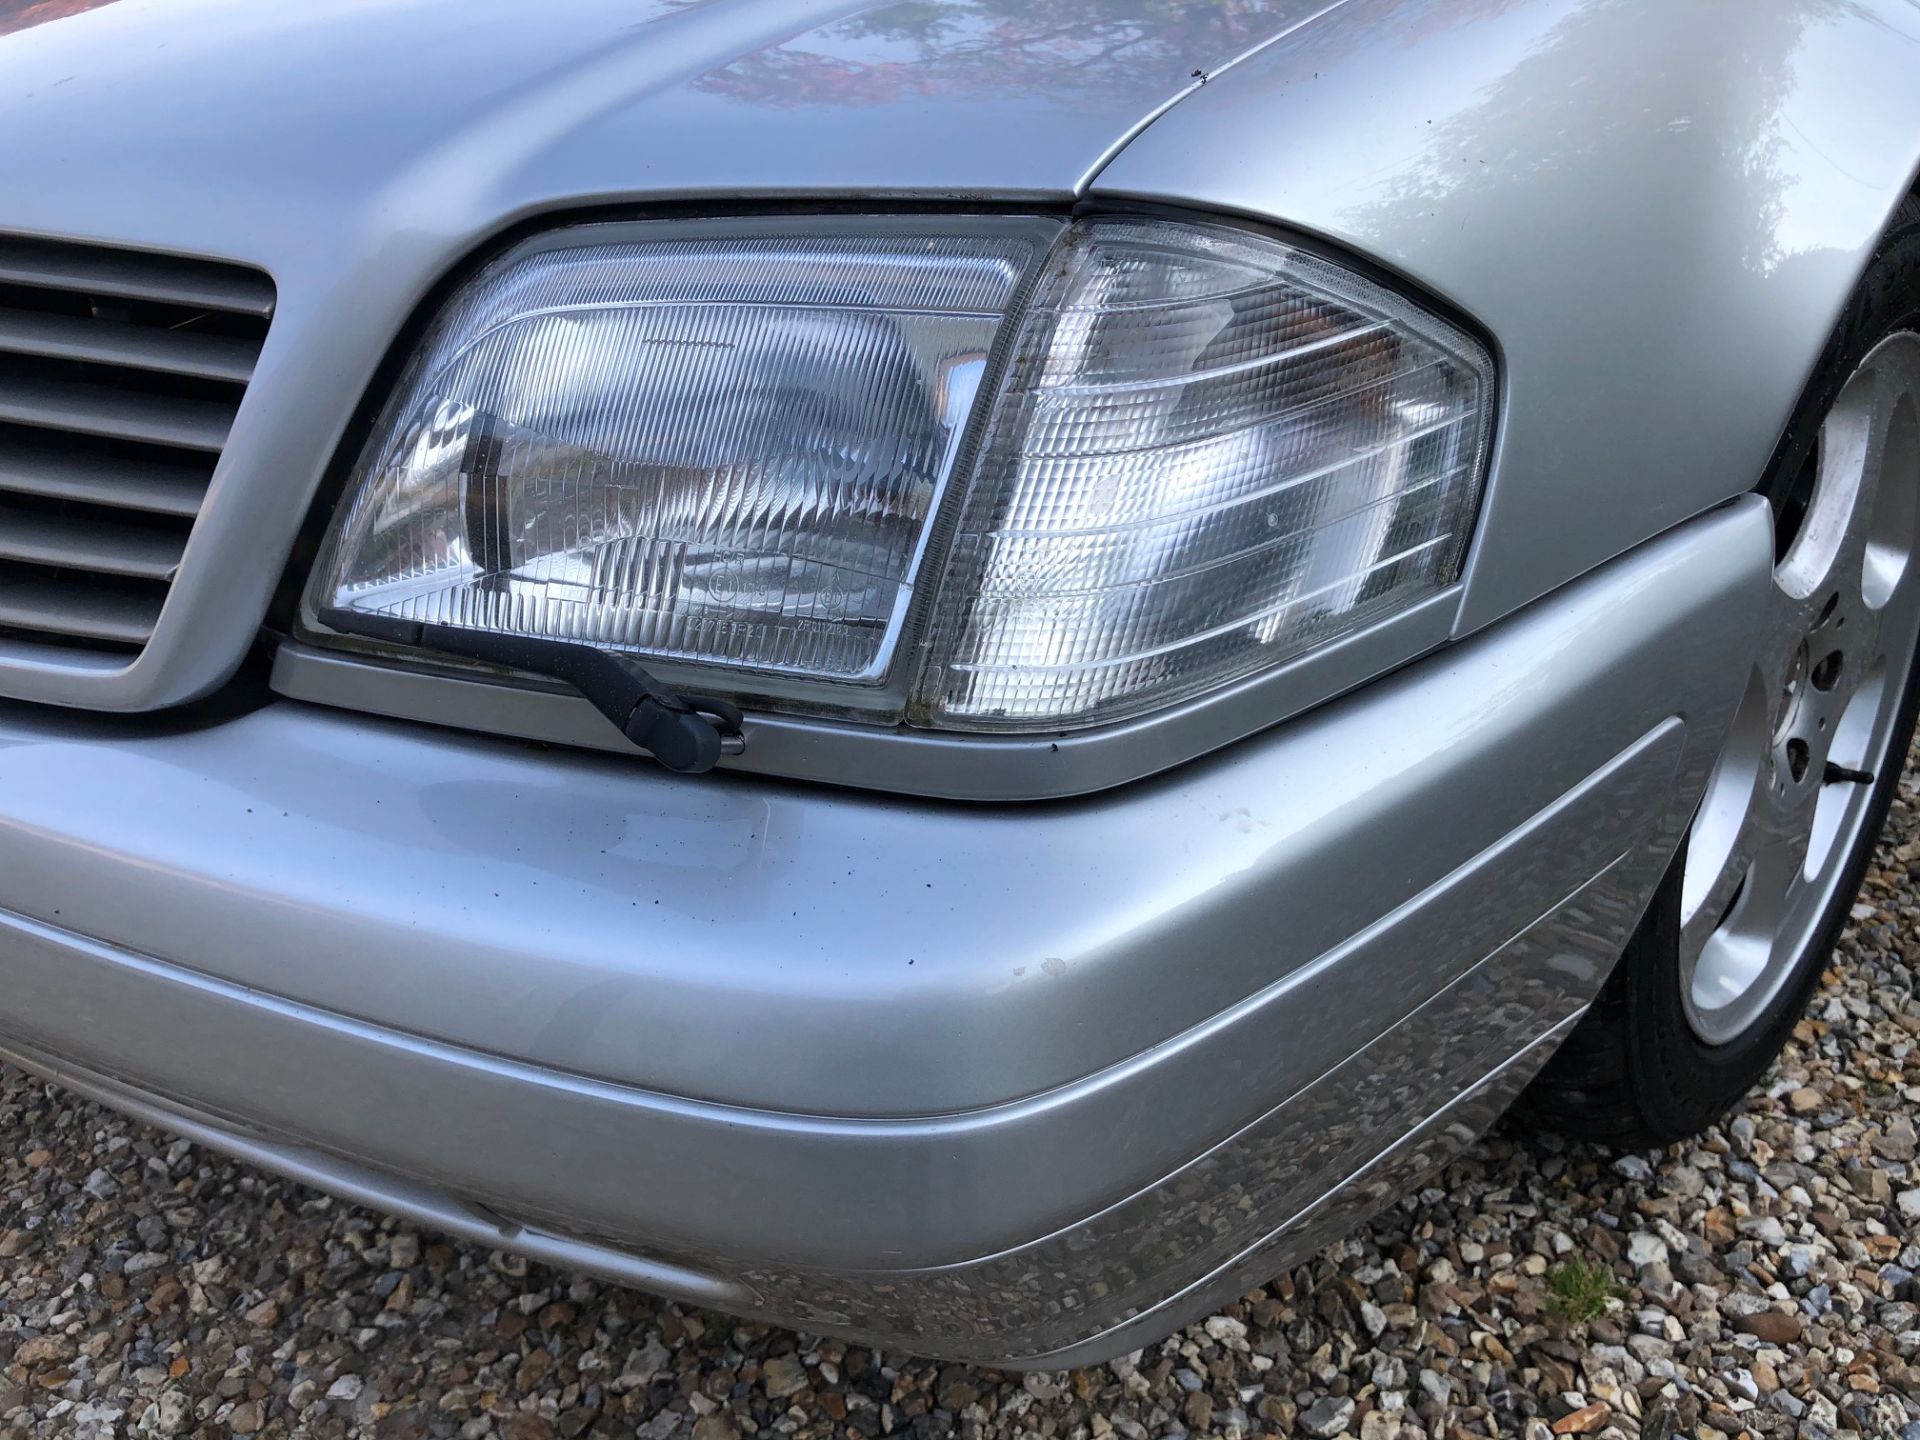 A 1998 Mercedes-Benz 320 SL Registration number S352 LFJ MOT expired March 2020 Metallic silver with - Image 17 of 57